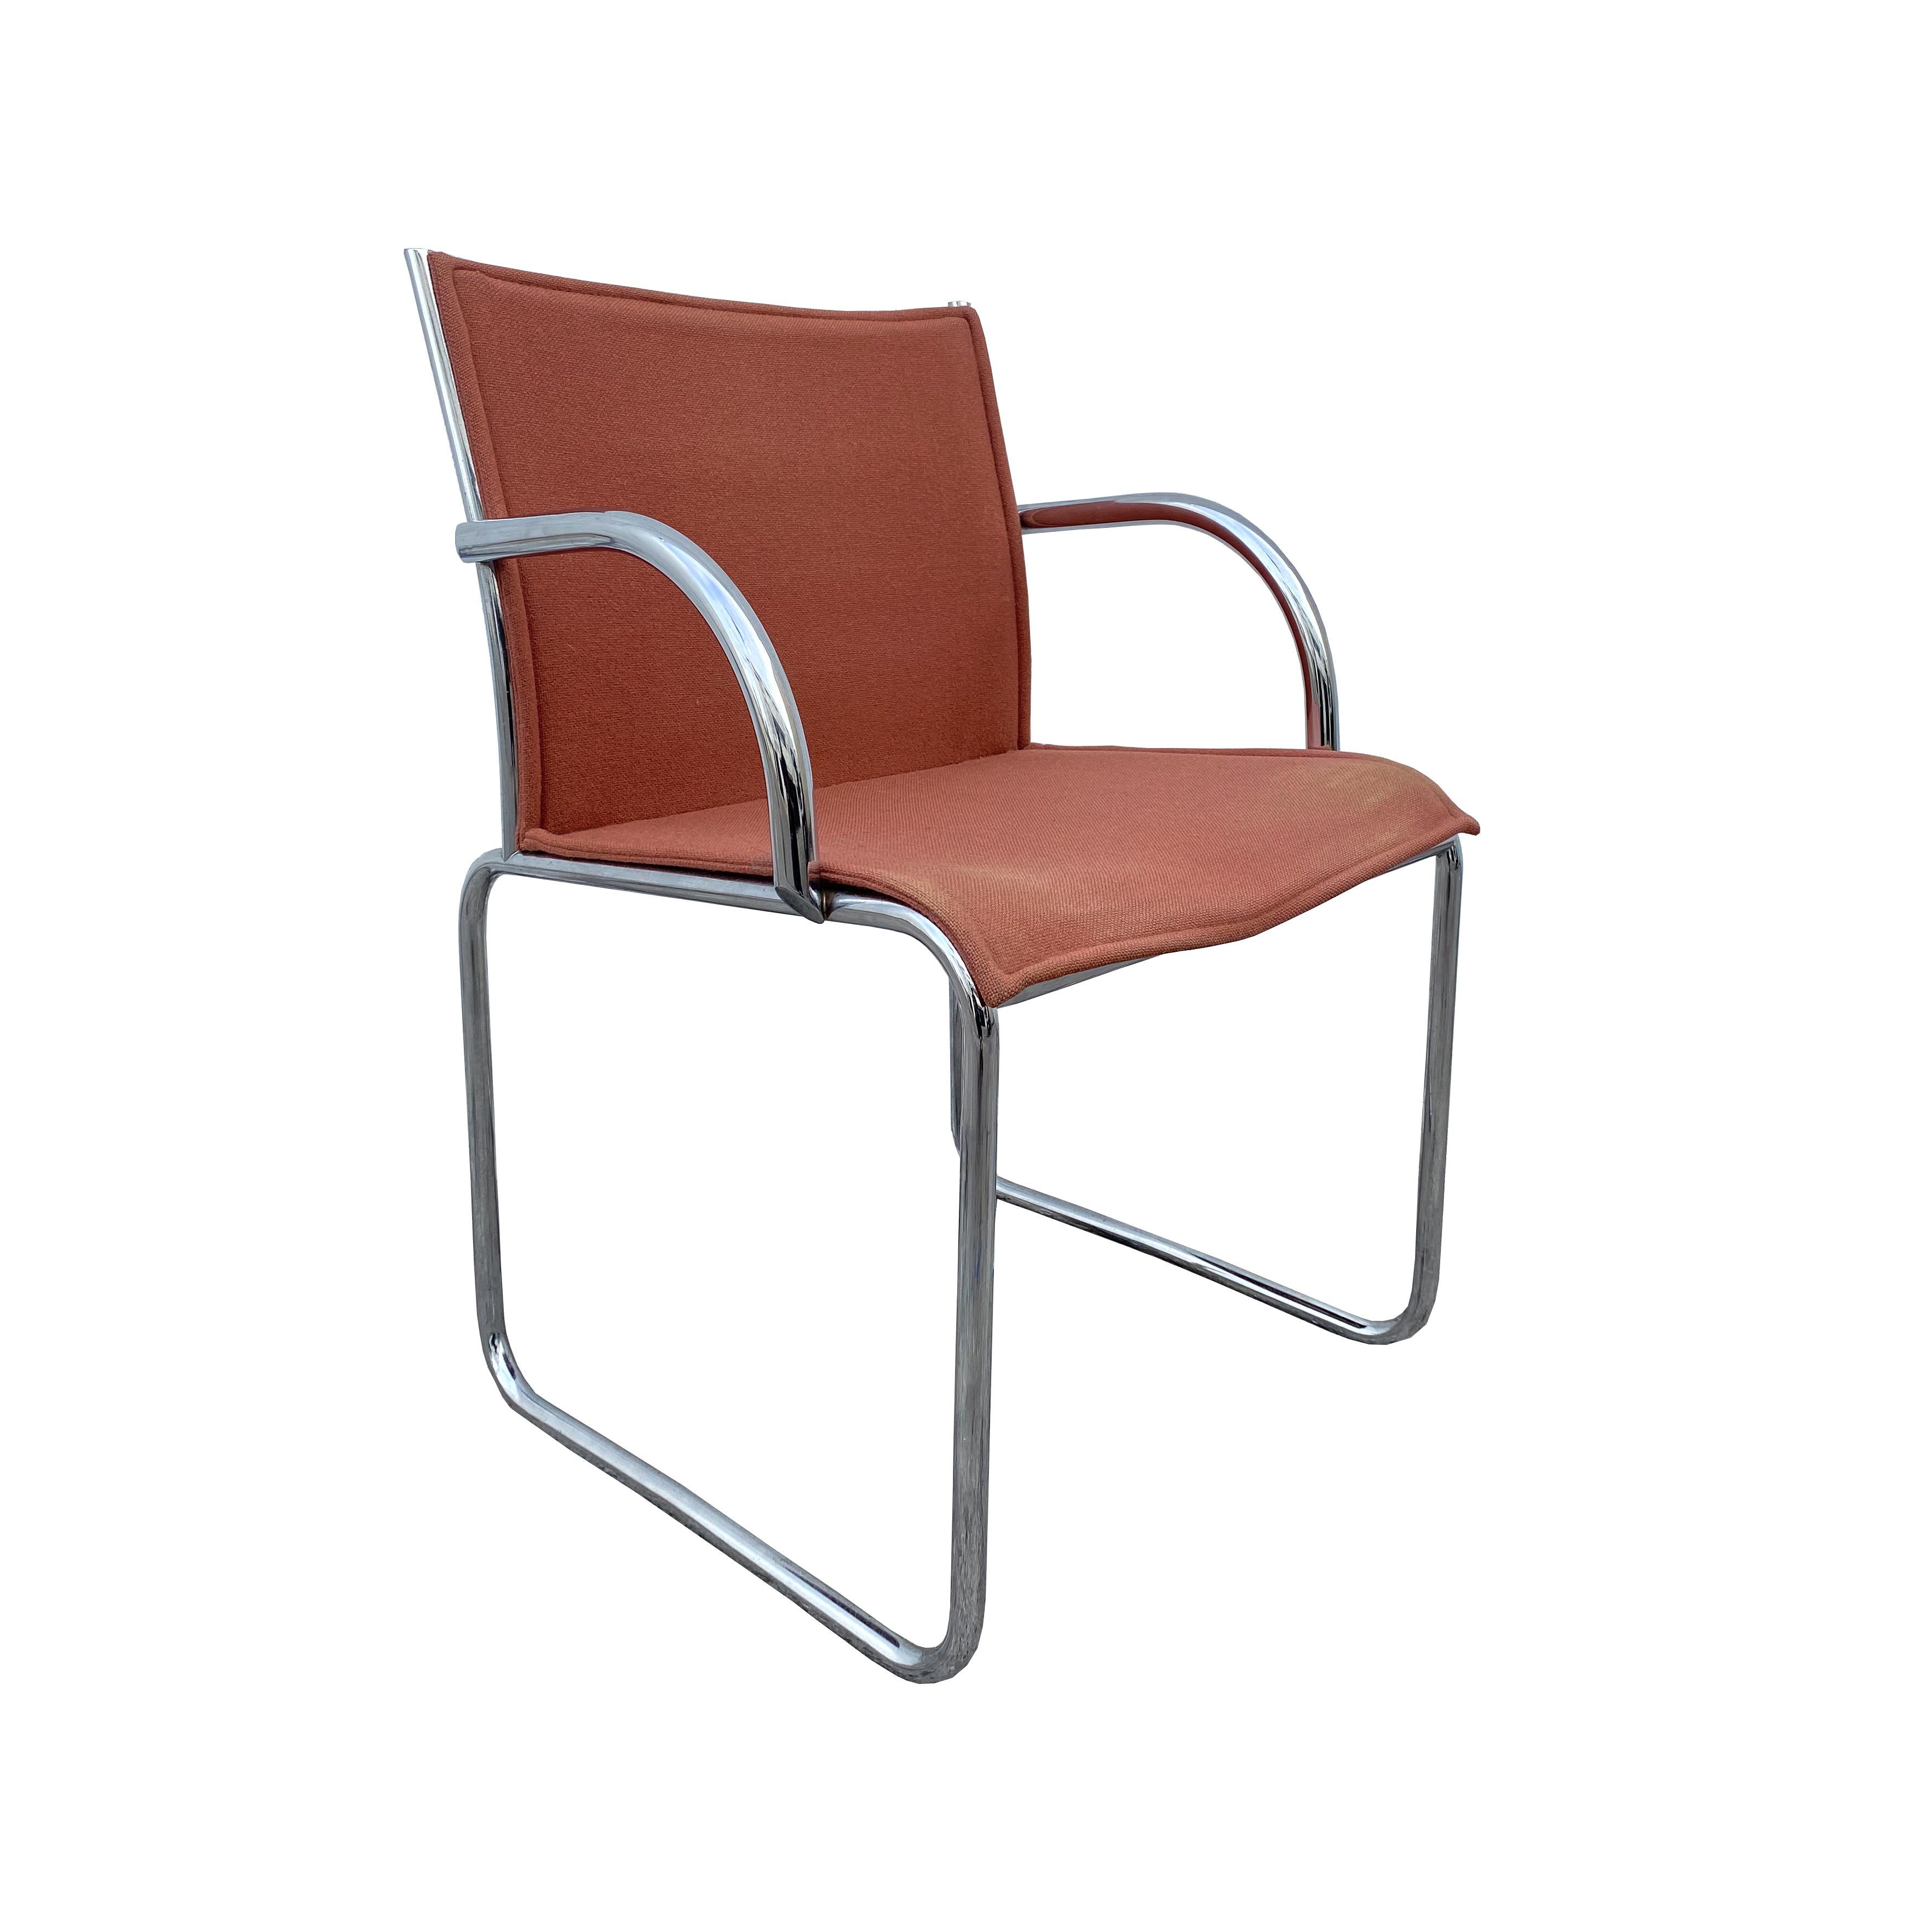 Immerse yourself in the distinct appeal of this exceptionally rare Knoll 1407 chair. An embodiment of Richard Schultz's visionary design from the 1980s, this captivating piece reflects the aesthetic appeal of both the Cesca chair and a bicycle's